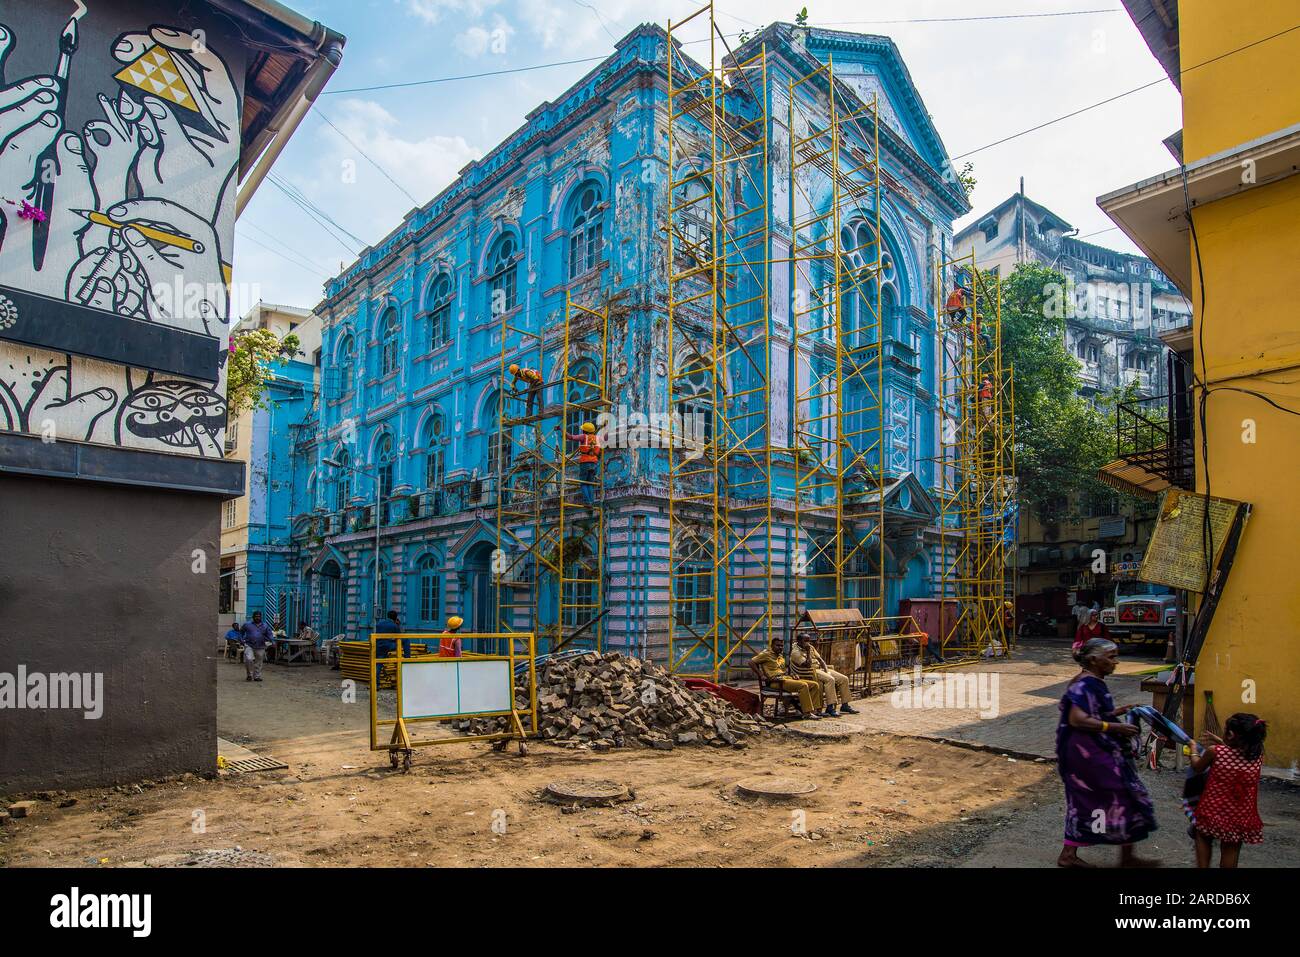 Mumbai, India - December 15, 2017: A blue synagogue being renovated with scaffoldings with some passersby. Stock Photo